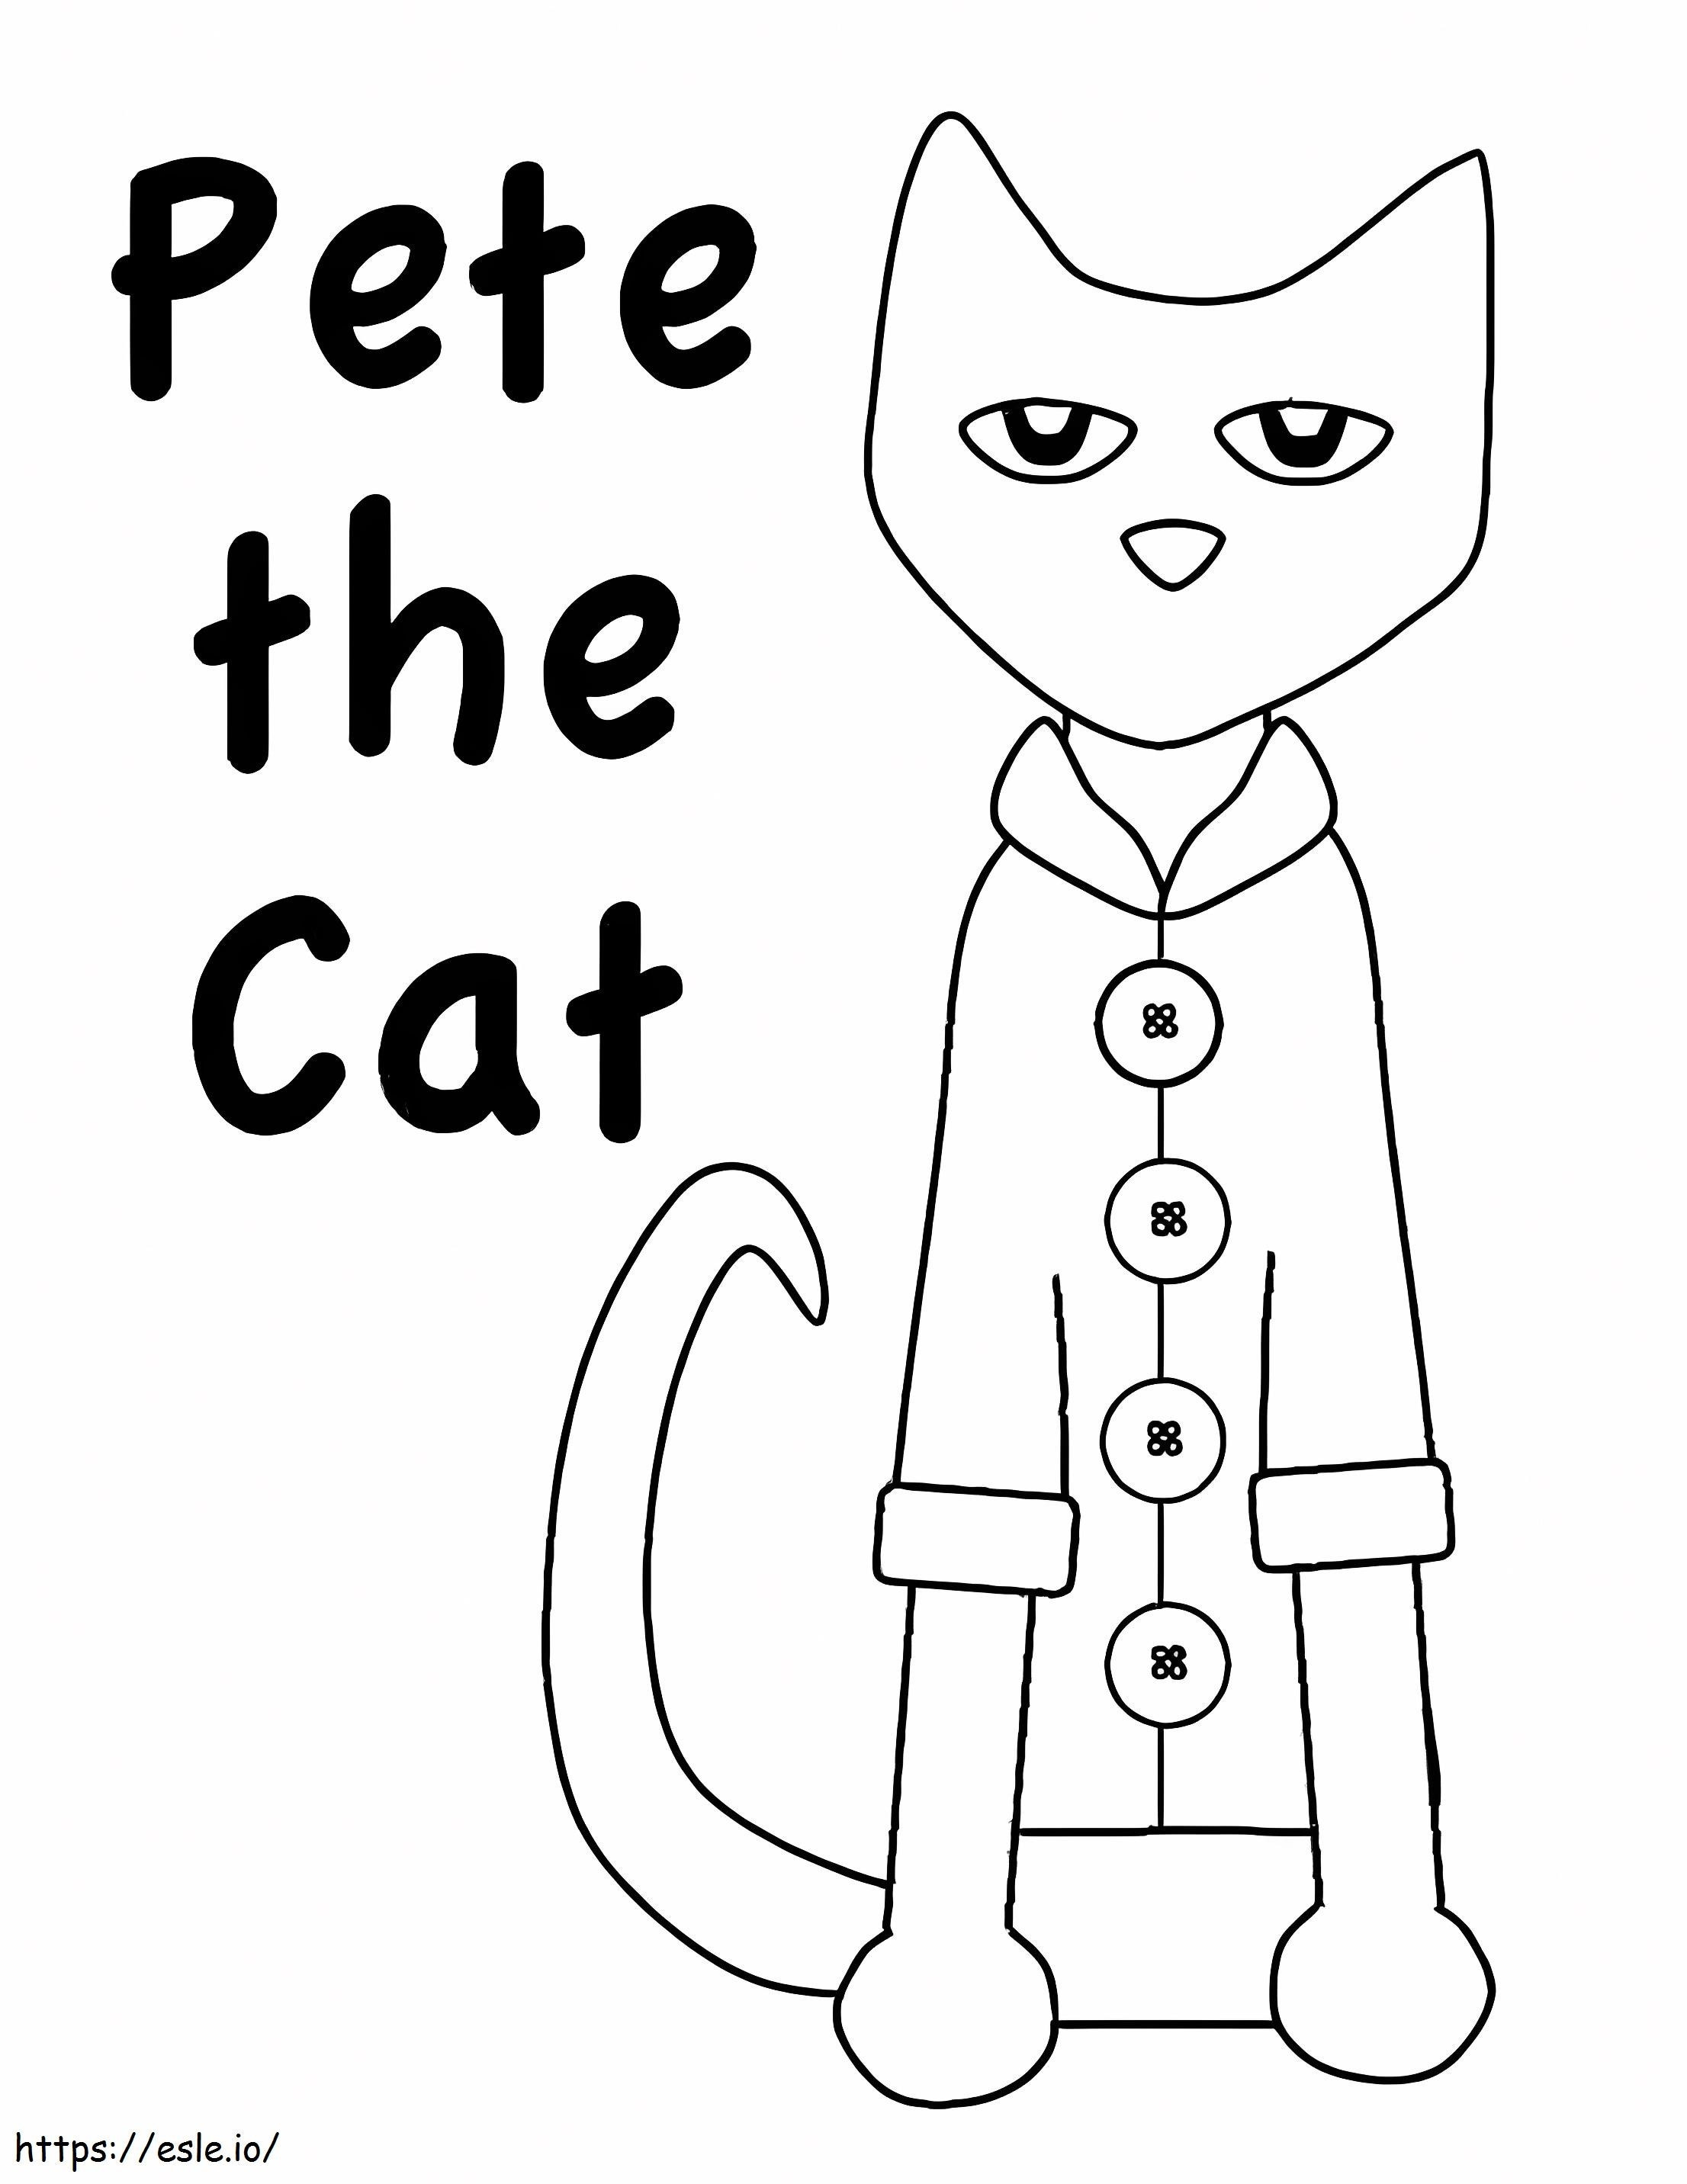 Pete The Cat Sitting coloring page